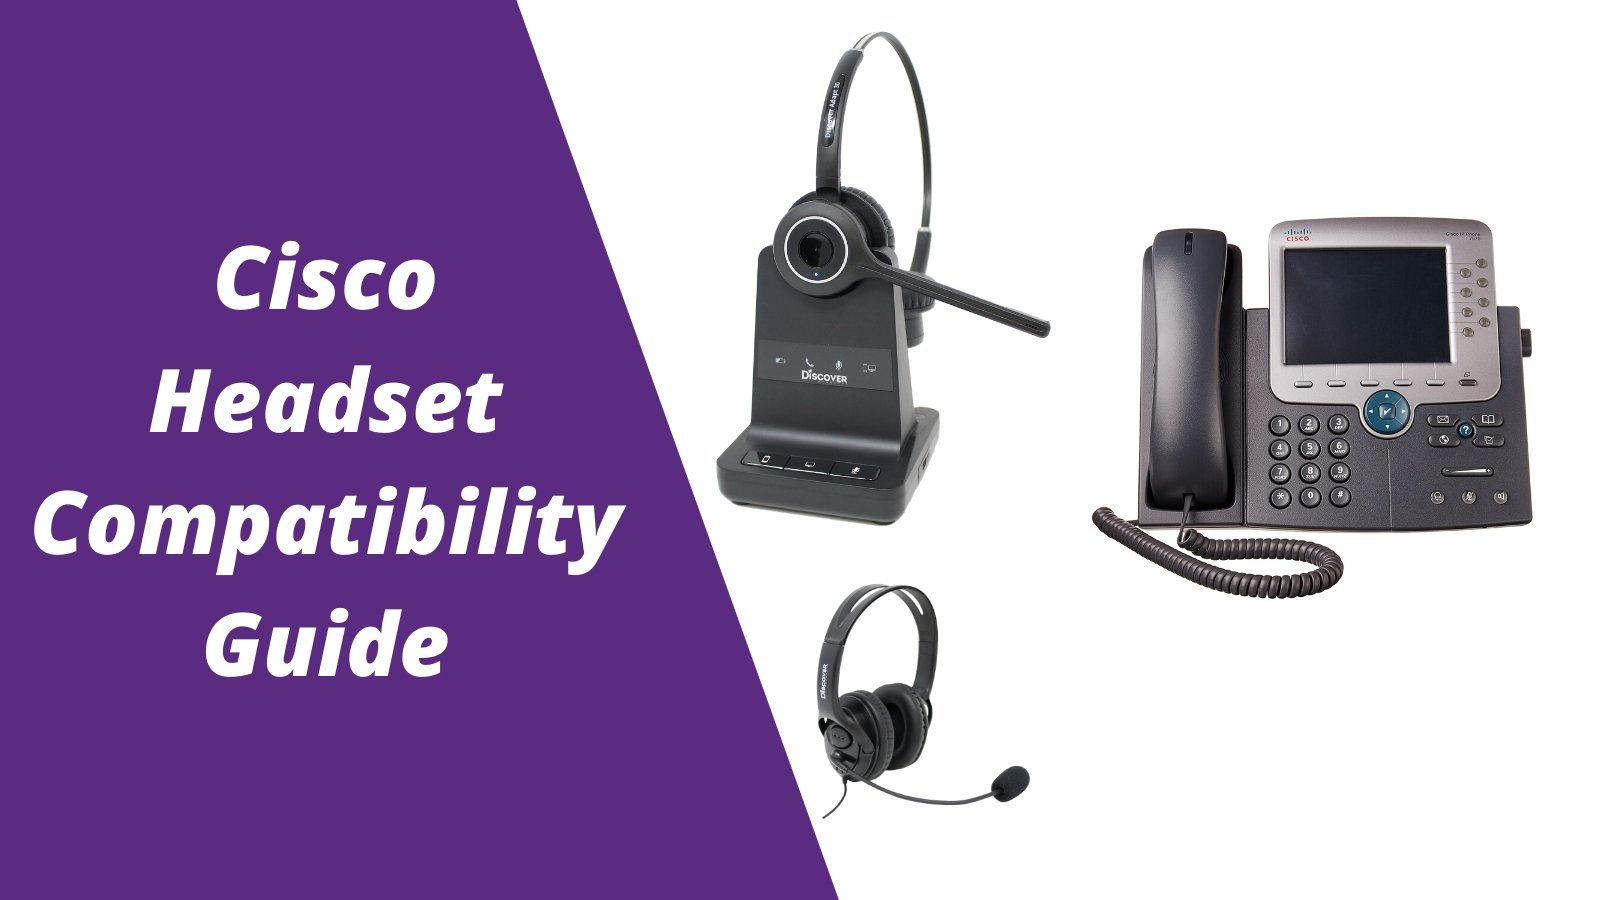 Cisco Headset Compatibility Guide: Everything You Need To Know - Headset Advisor